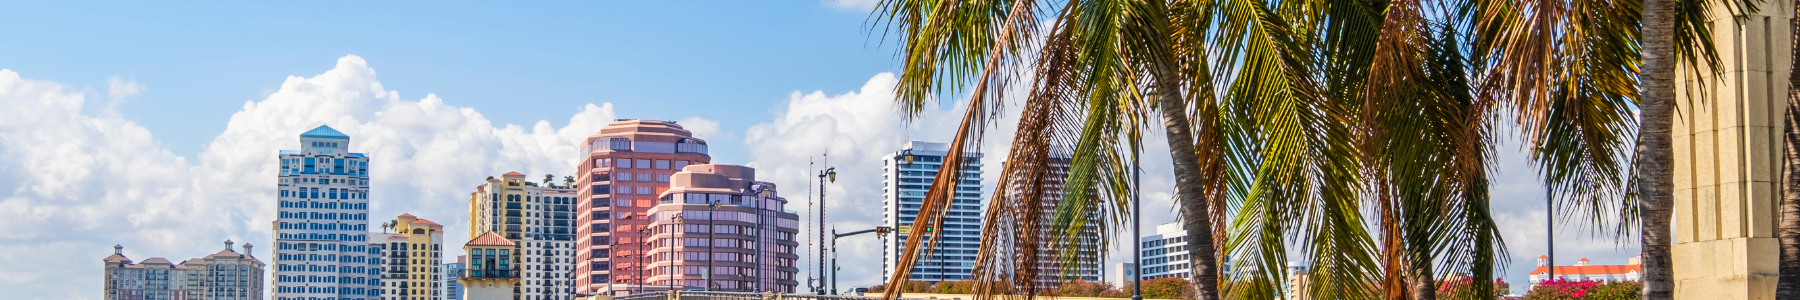 A city skyline in the daytime with a palm tree in the foreground.